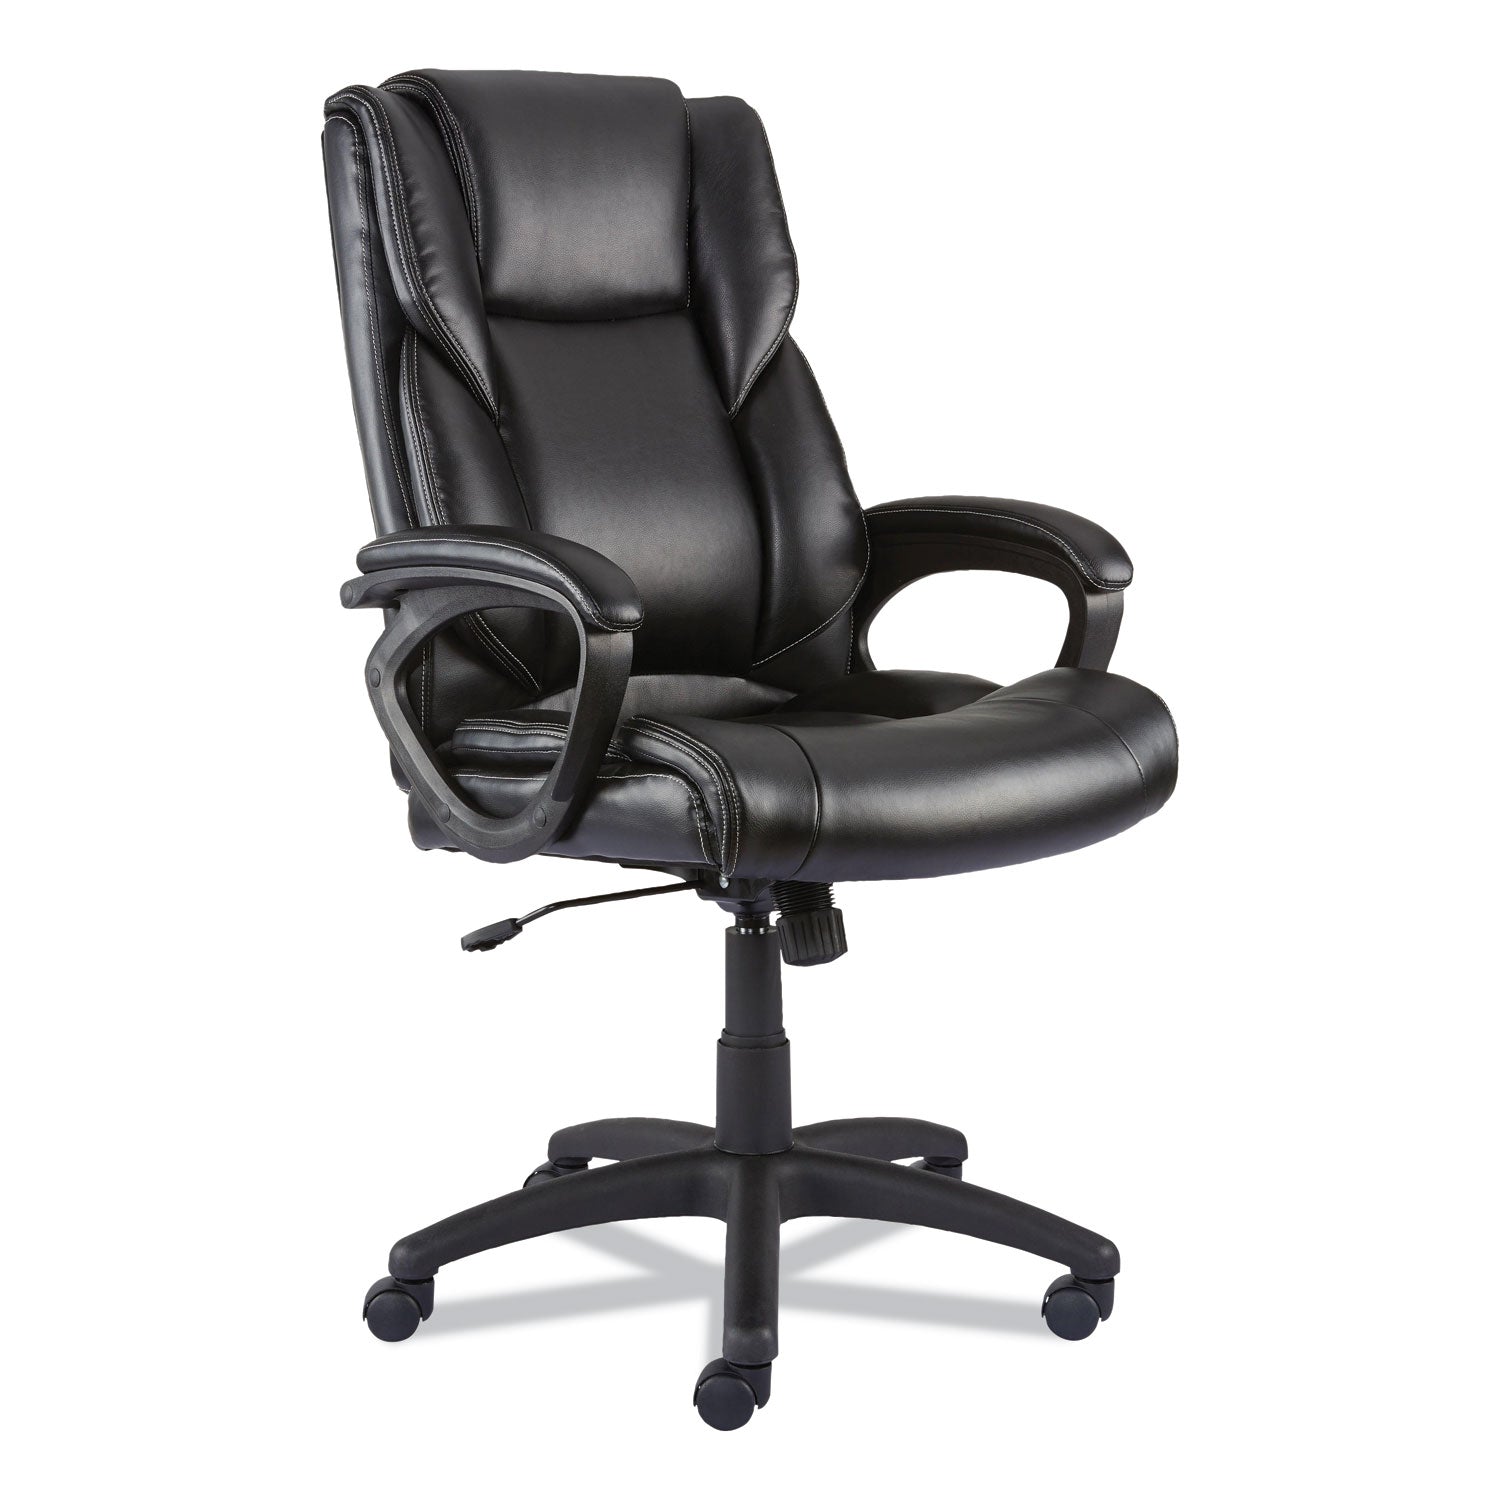 Alera Brosna Series Mid-Back Task Chair, Supports Up to 250 lb, 18.15" to 21.77 Seat Height, Black Seat/Back, Black Base - 1